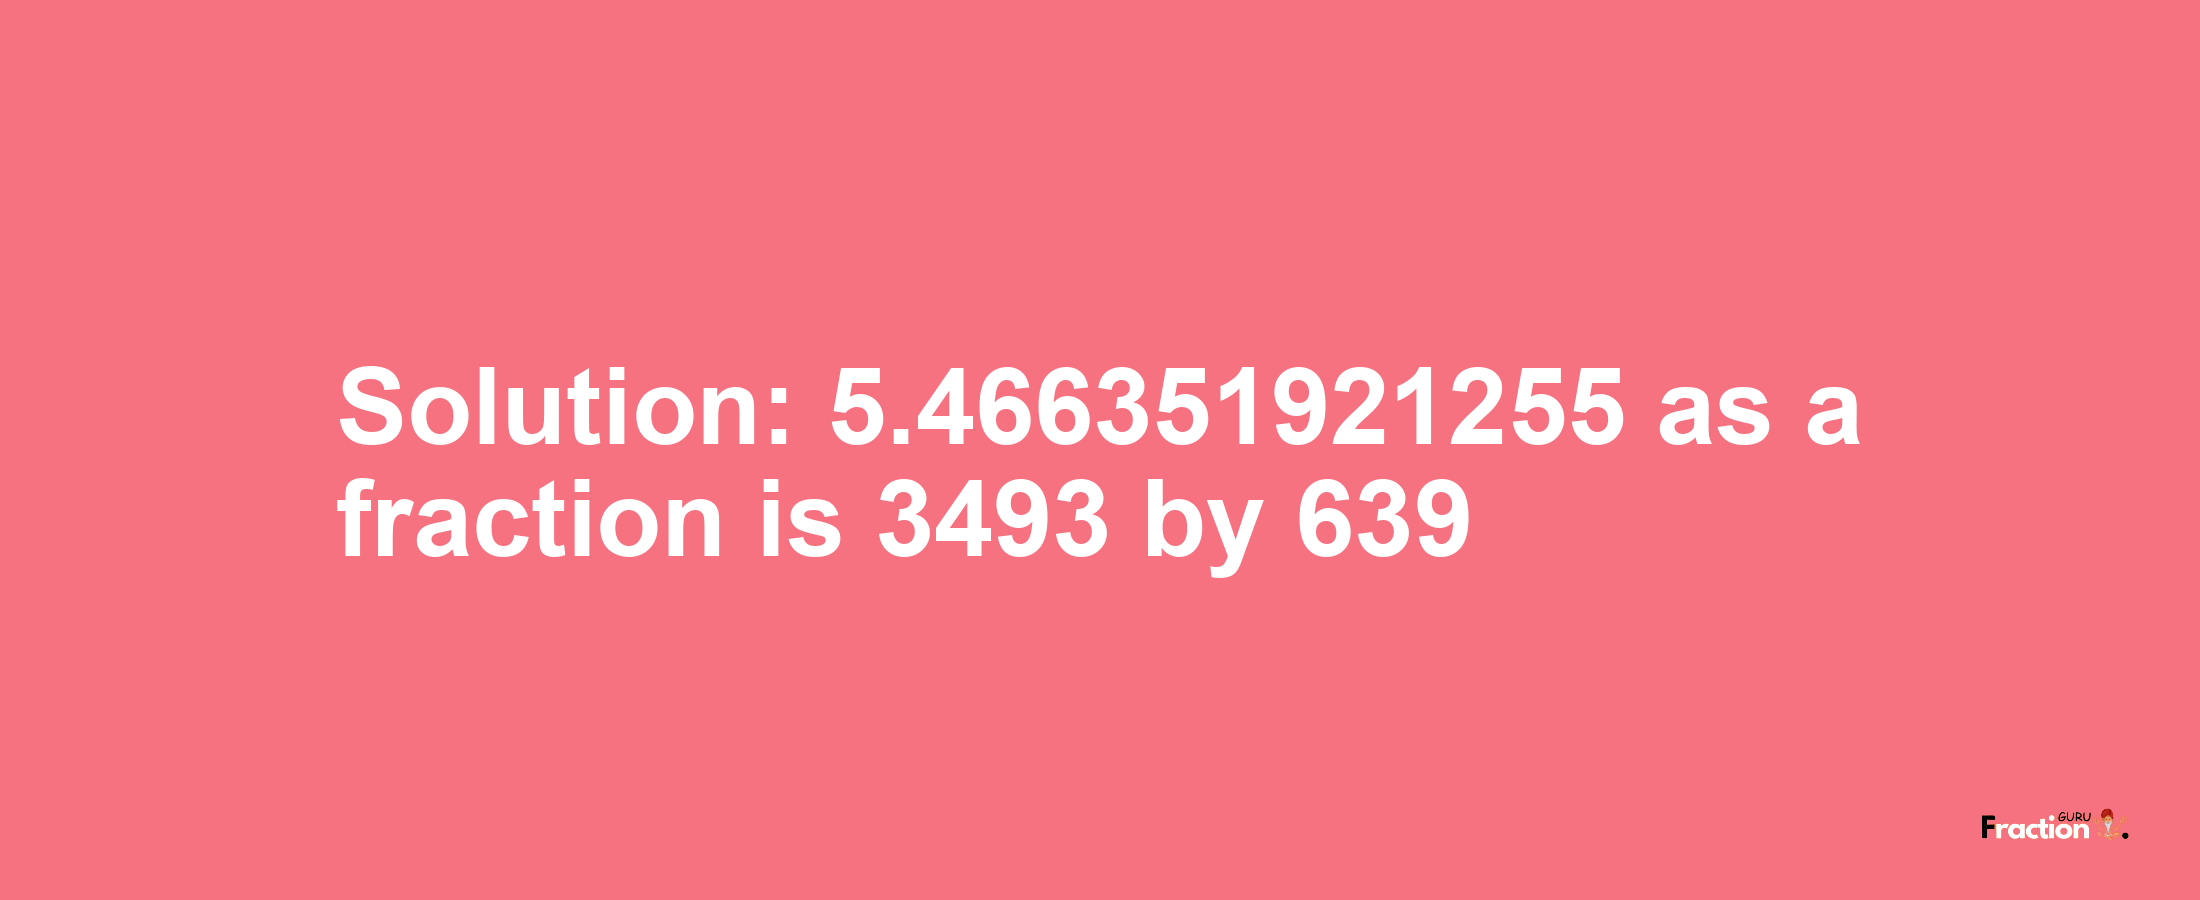 Solution:5.466351921255 as a fraction is 3493/639